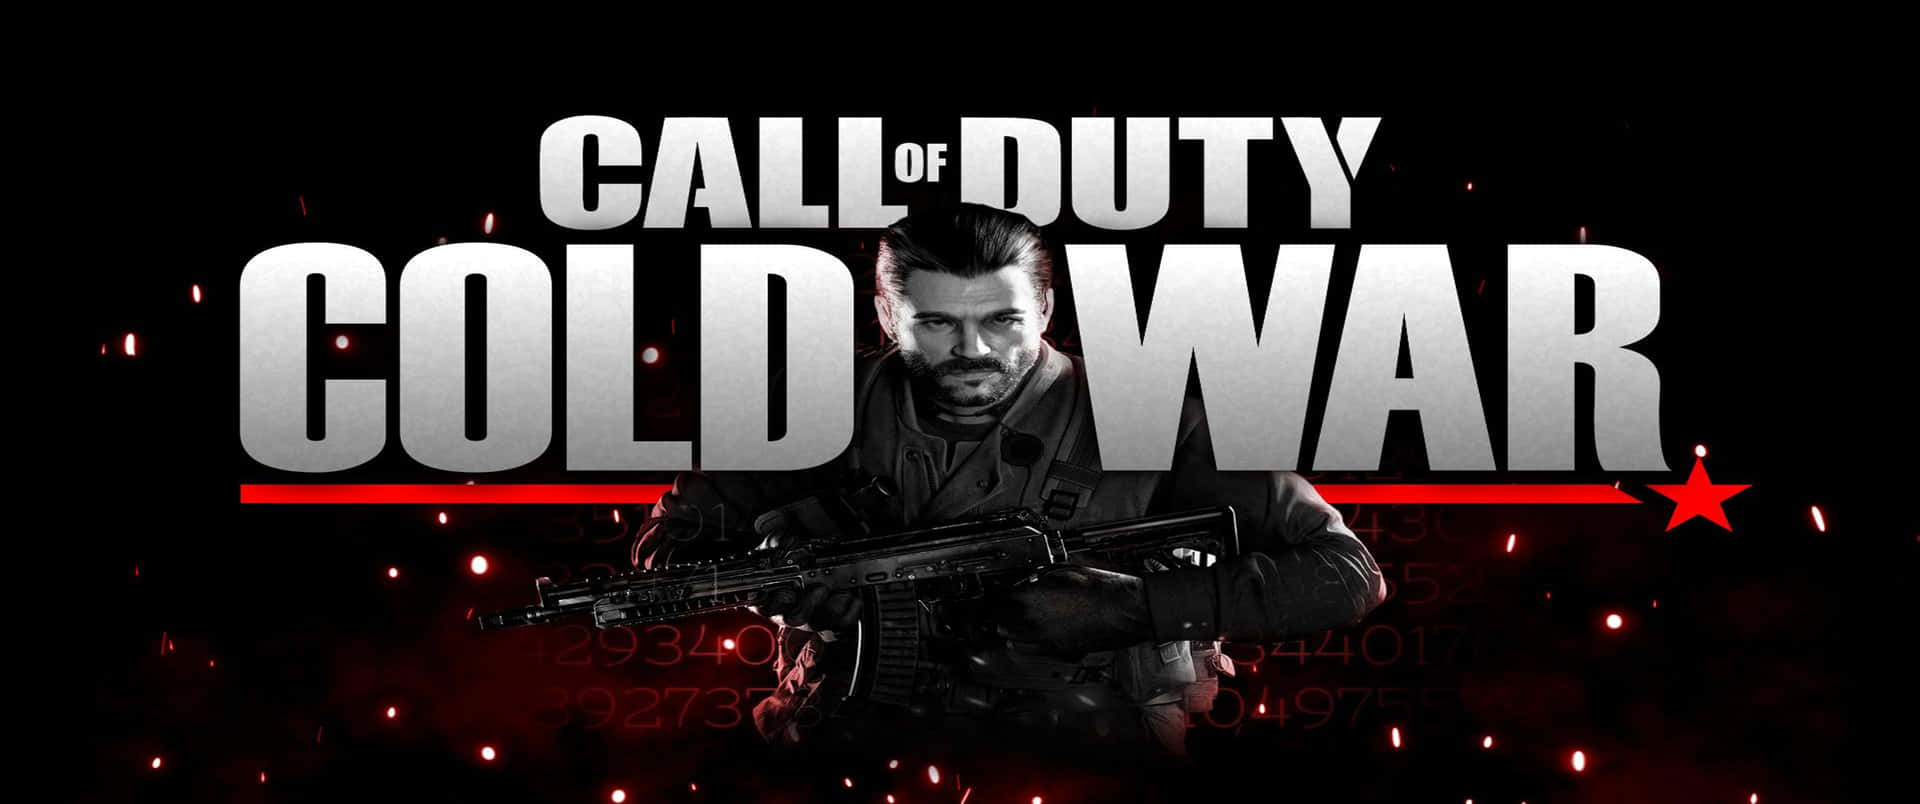 Outstanding 3440x1440p Call Of Duty Black Ops Cold War Background